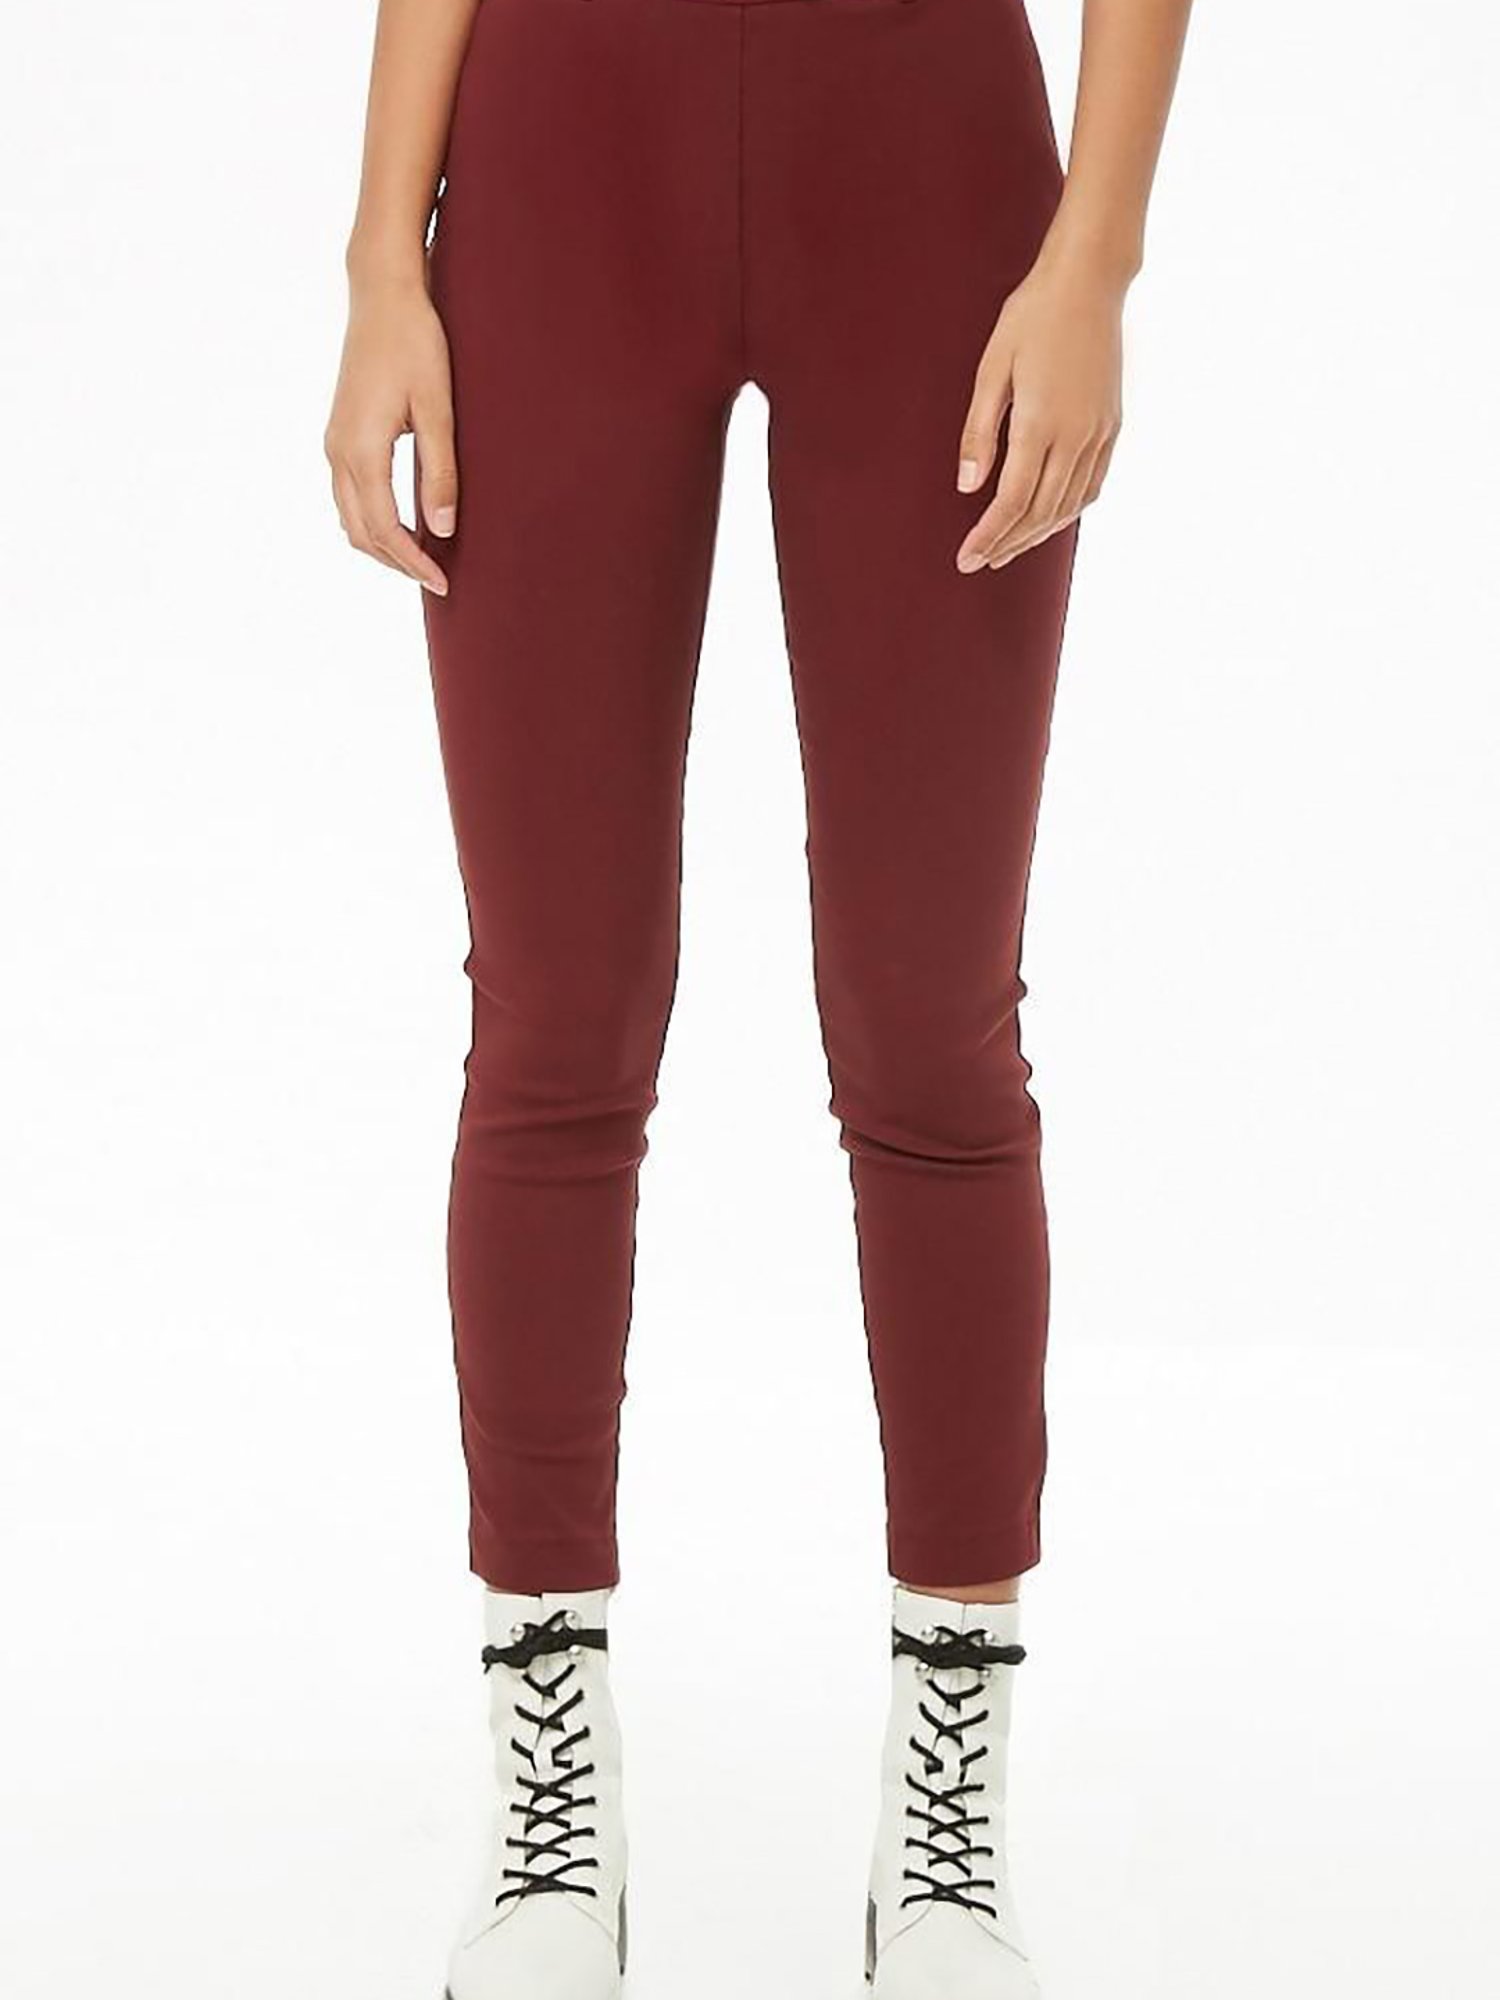 Maroon High Rise Tailored Slim Fit Pants